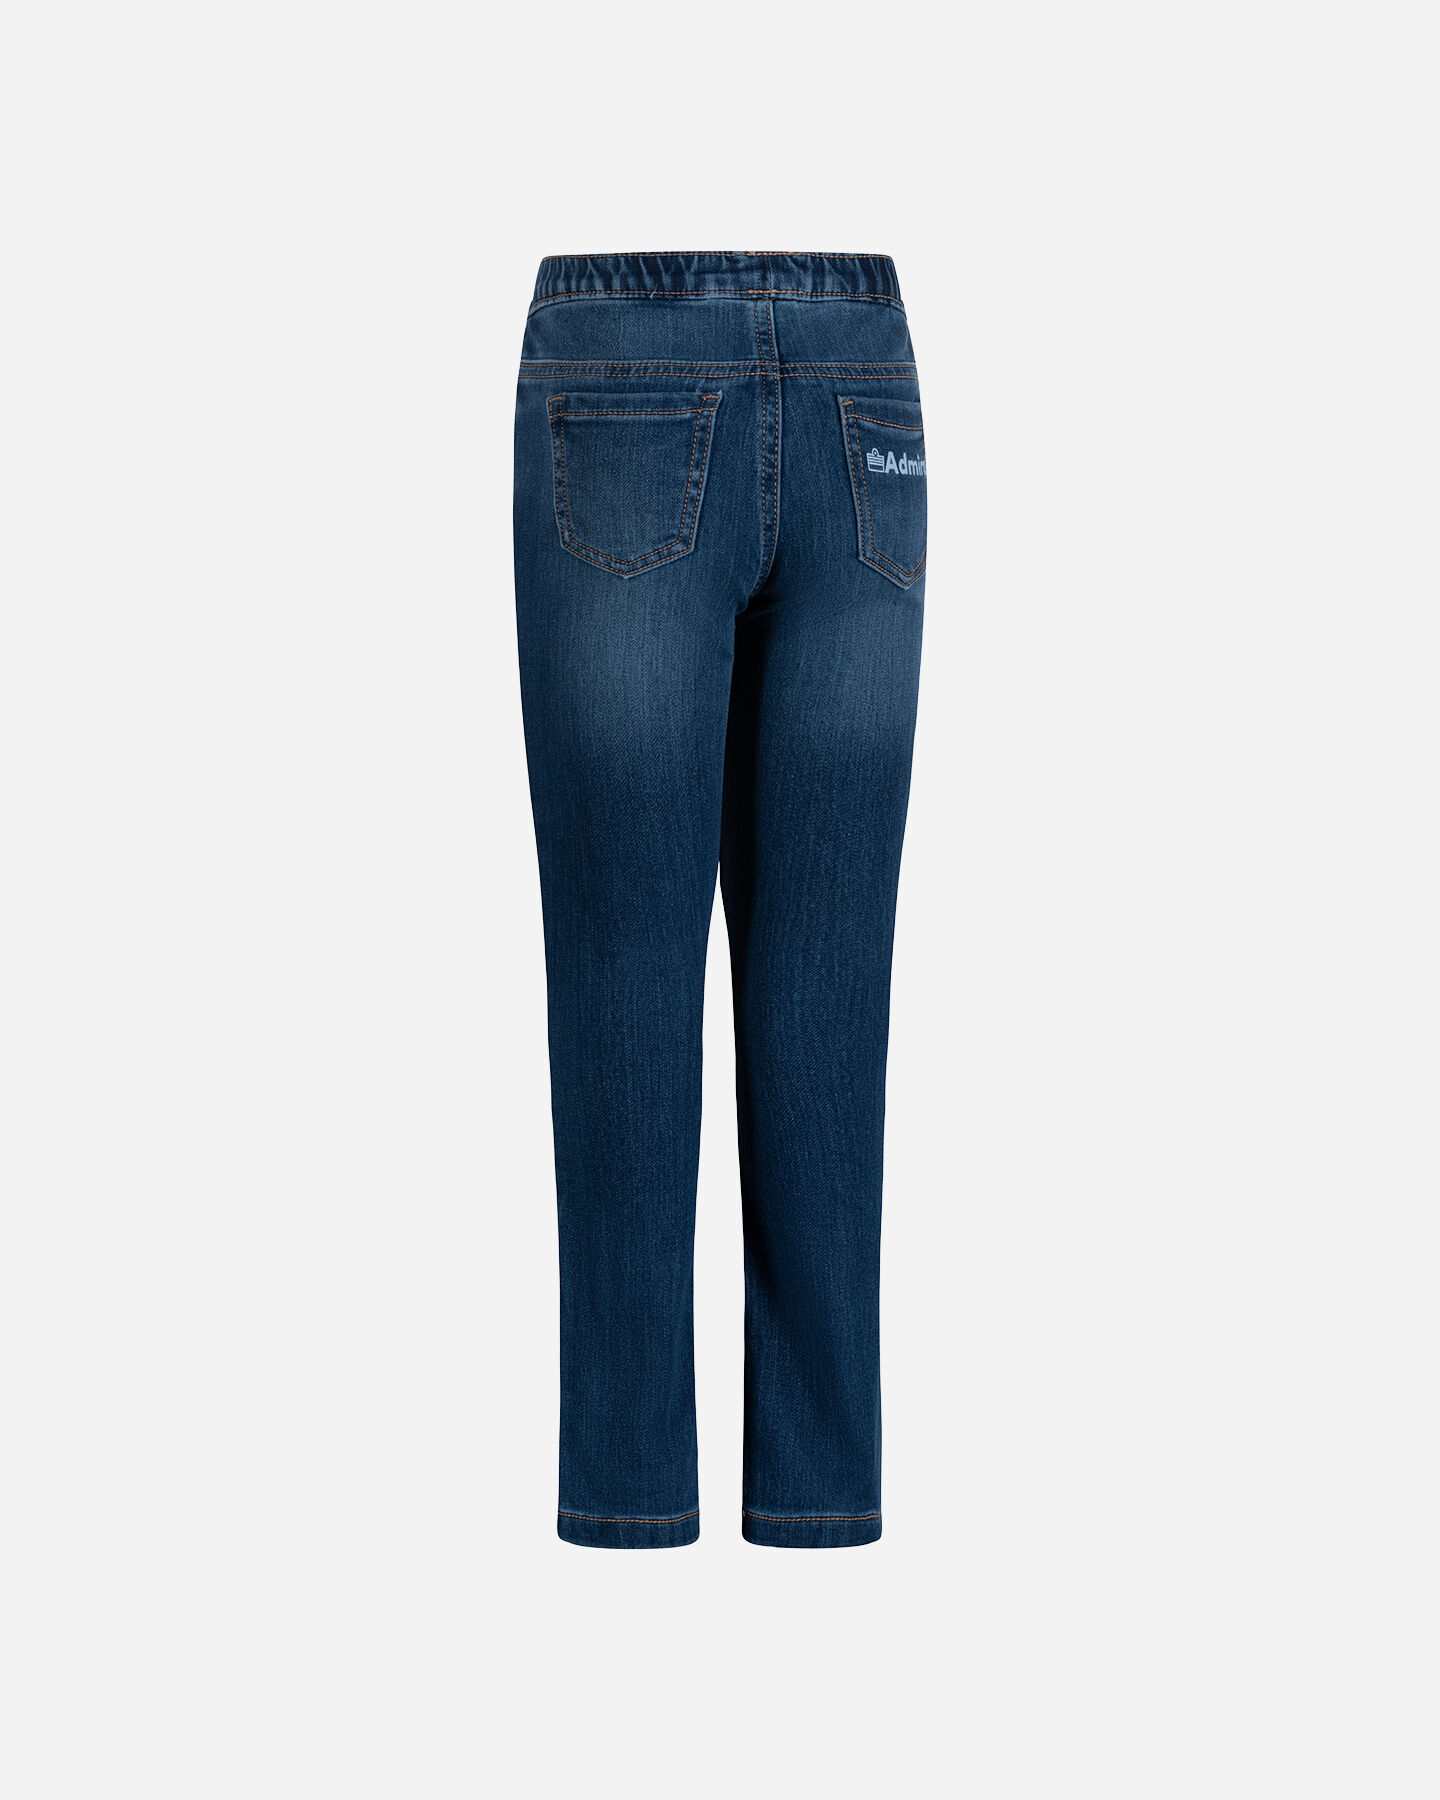  Jeans ADMIRAL COLLEGE BTS JR S4125683|MD|8A scatto 1